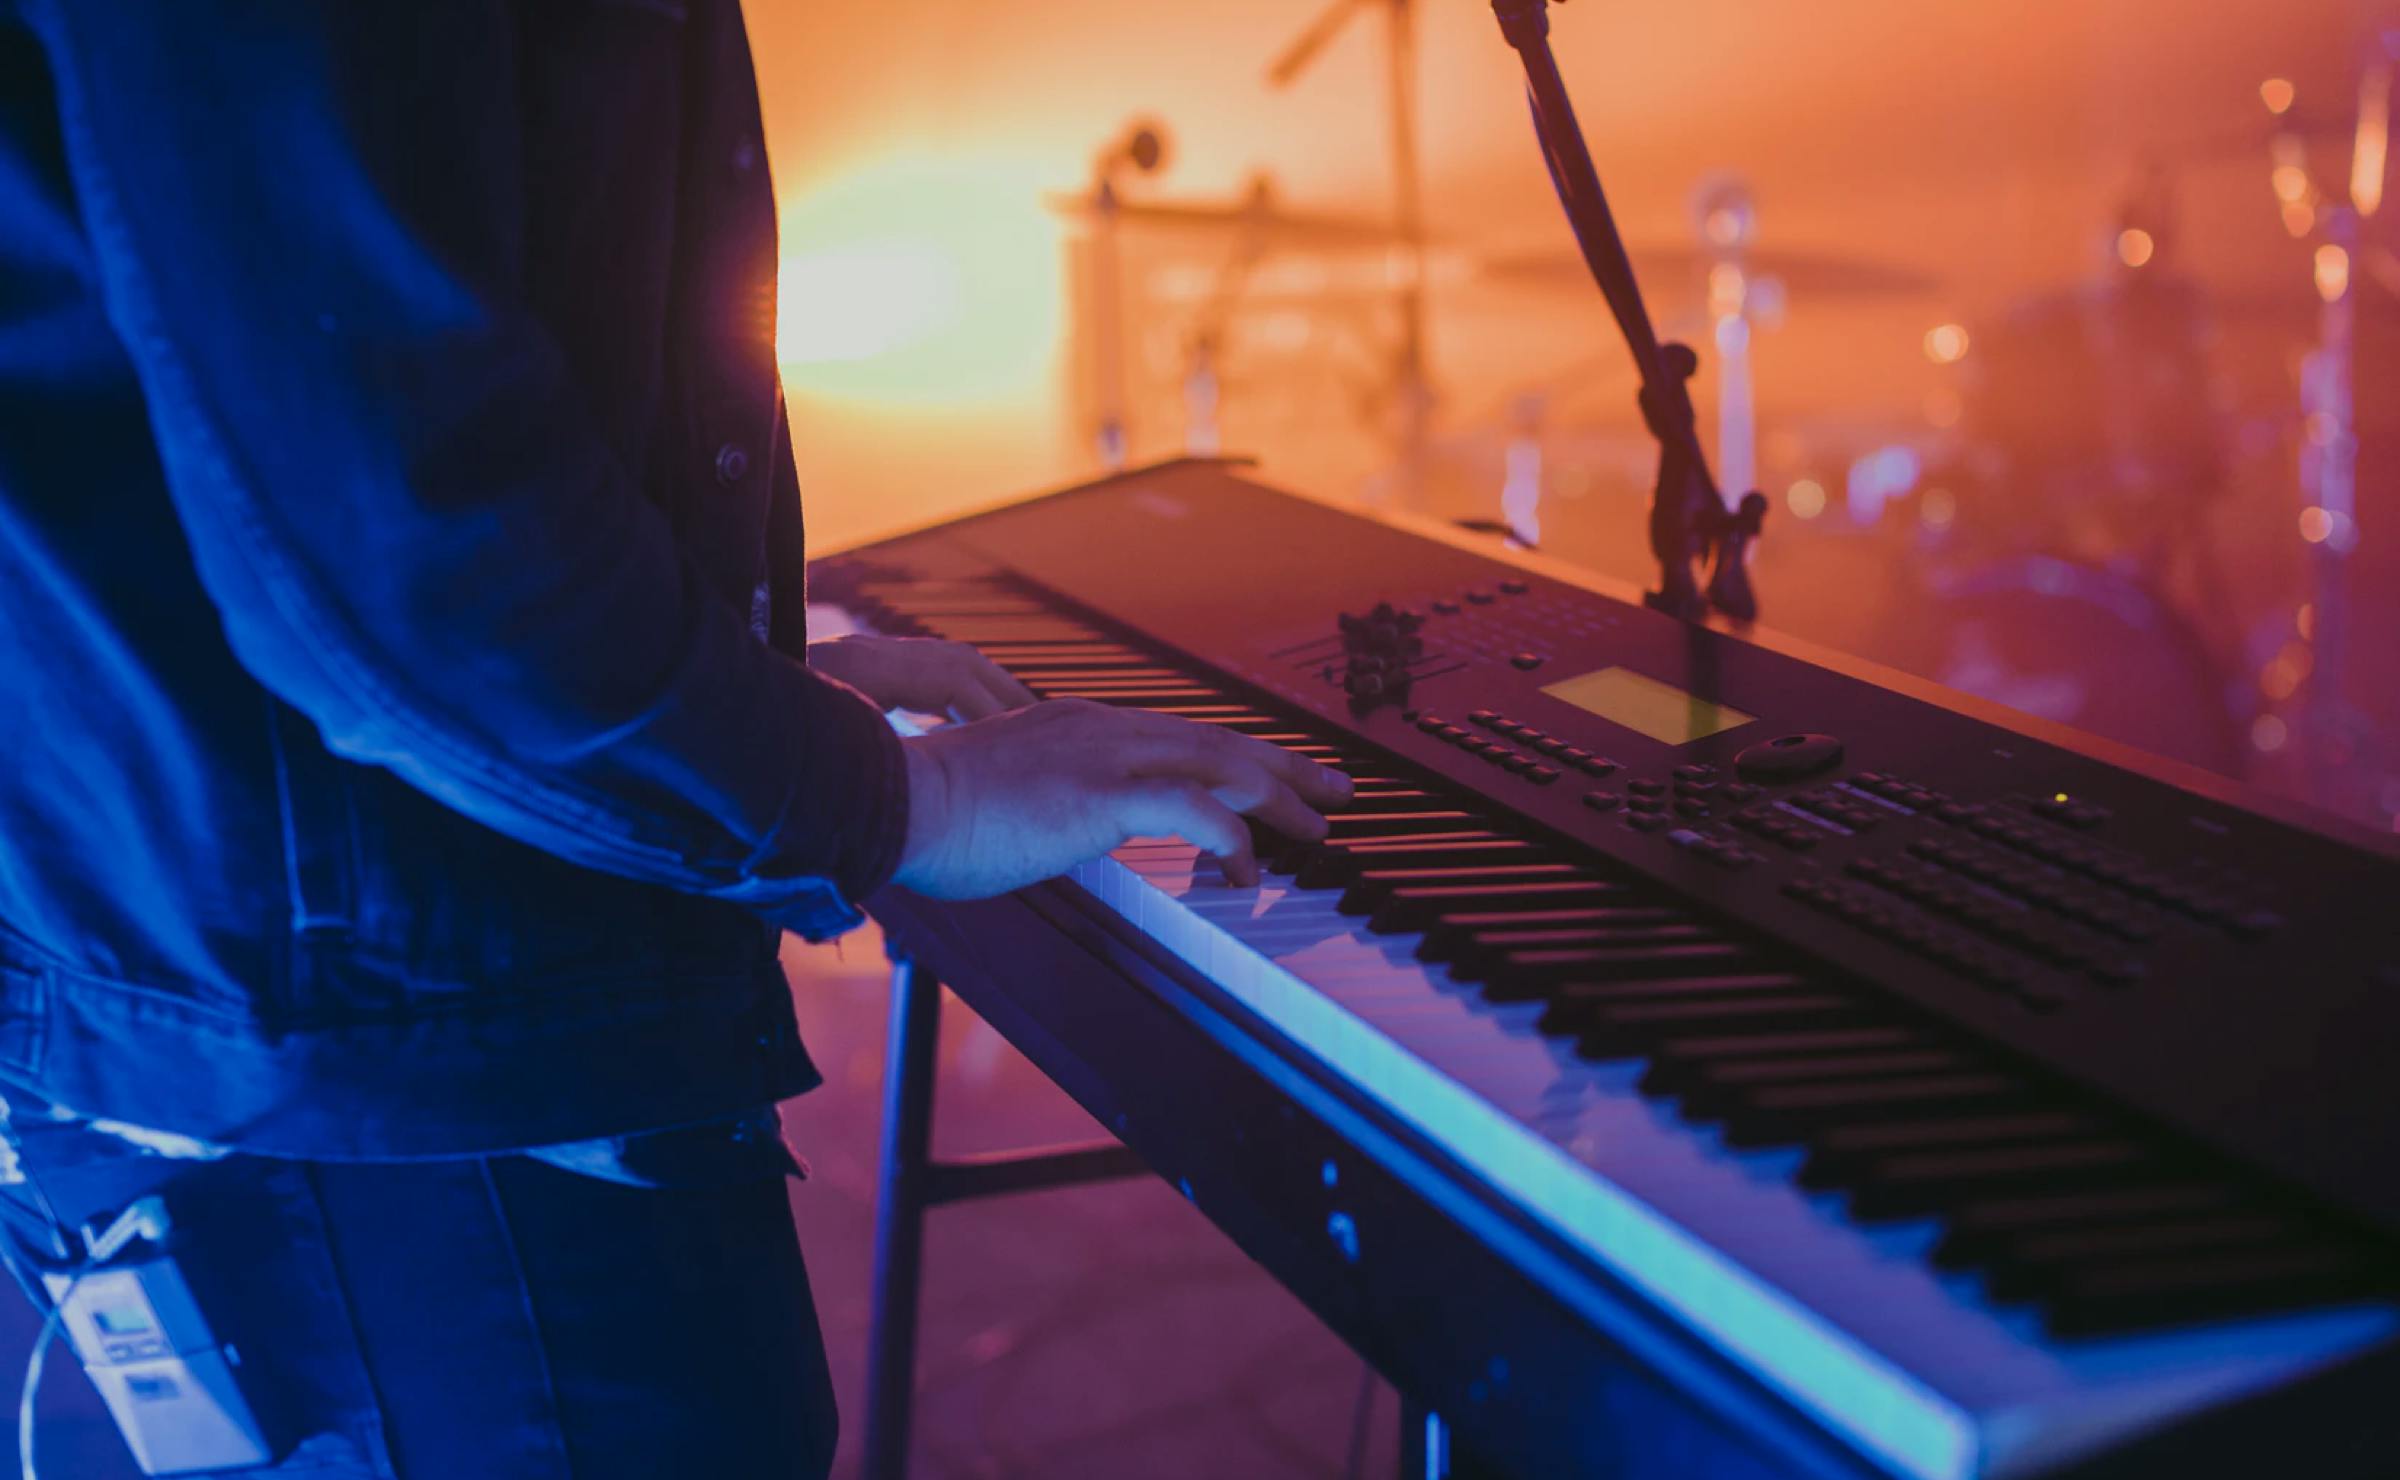 Keyboard player on a concert